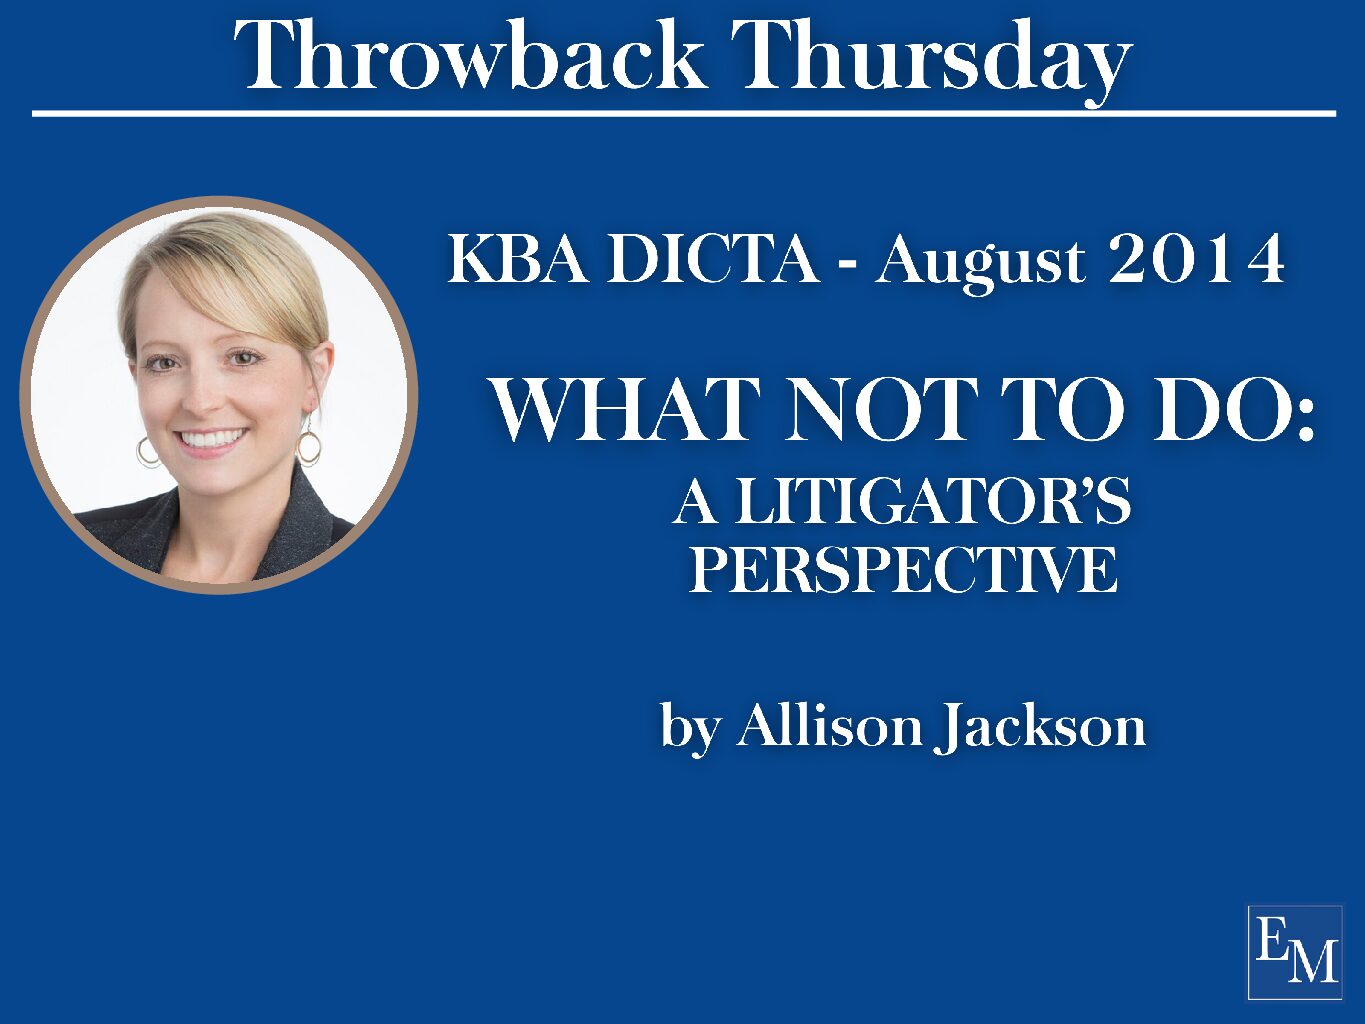 Throwback Thursday – WHAT NOT TO DO by Allison Jackson